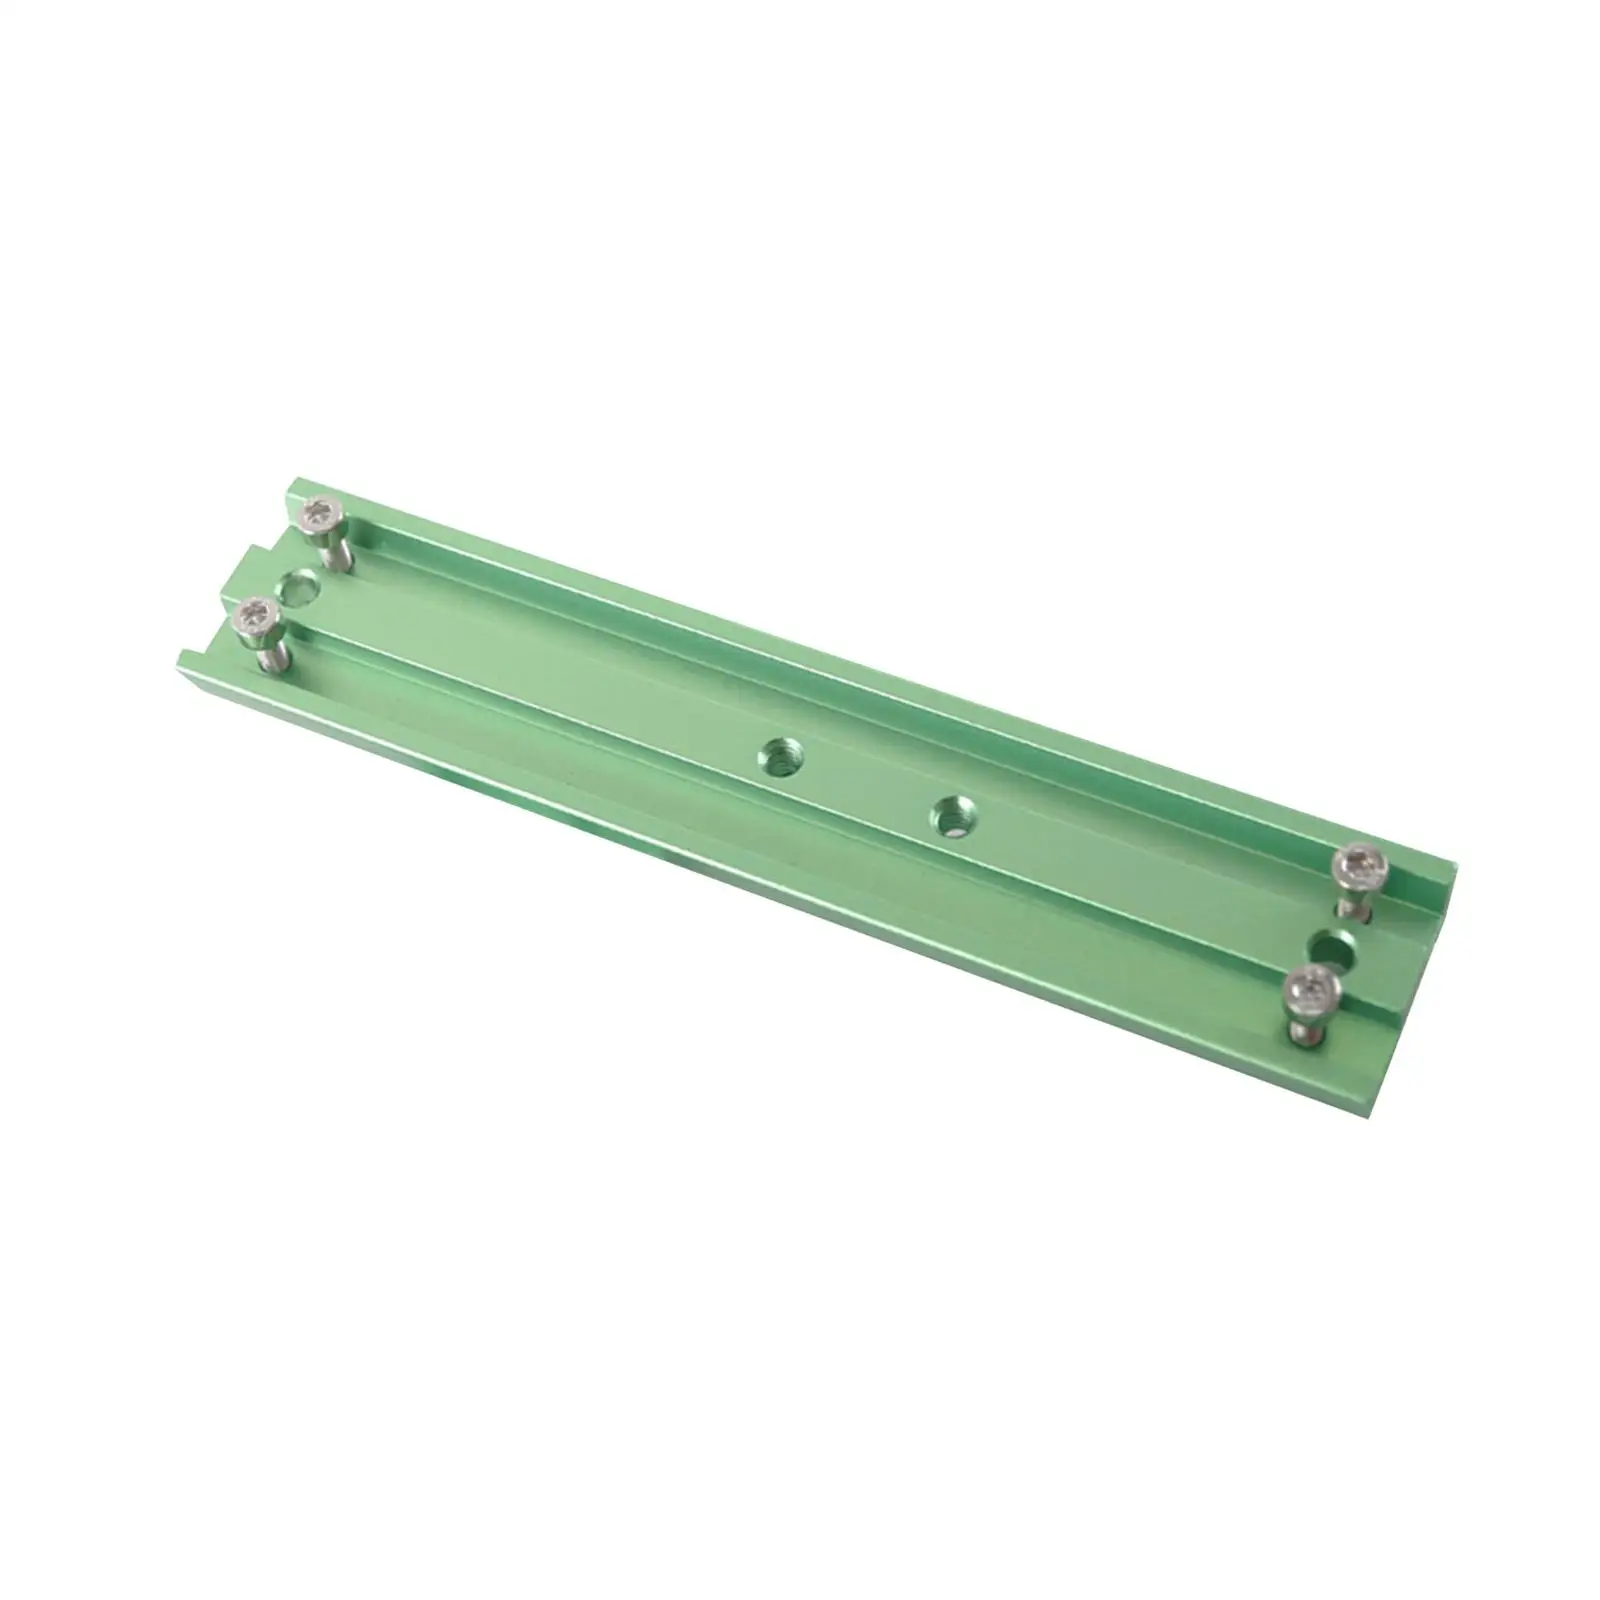 210mm Dovetail Mounting Plate for Astronomical Telescope Universal Green